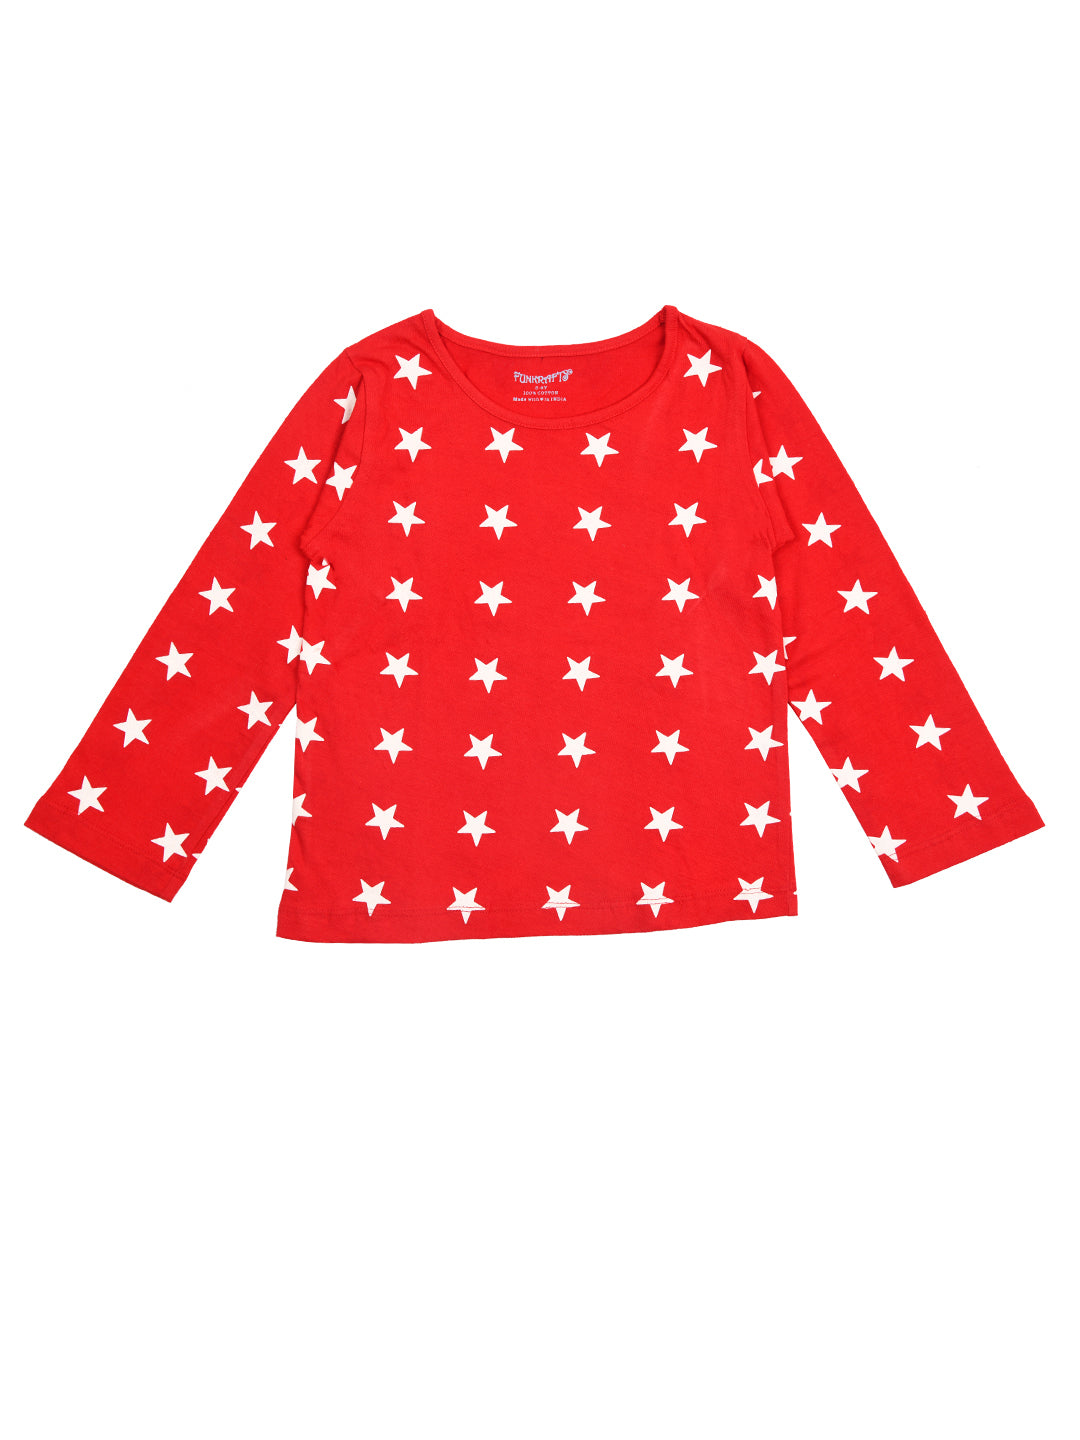 Blue & Red Pure Cotton Full Sleeves Printed T-shirt & Pyjama Set for Boys - Pack of 2